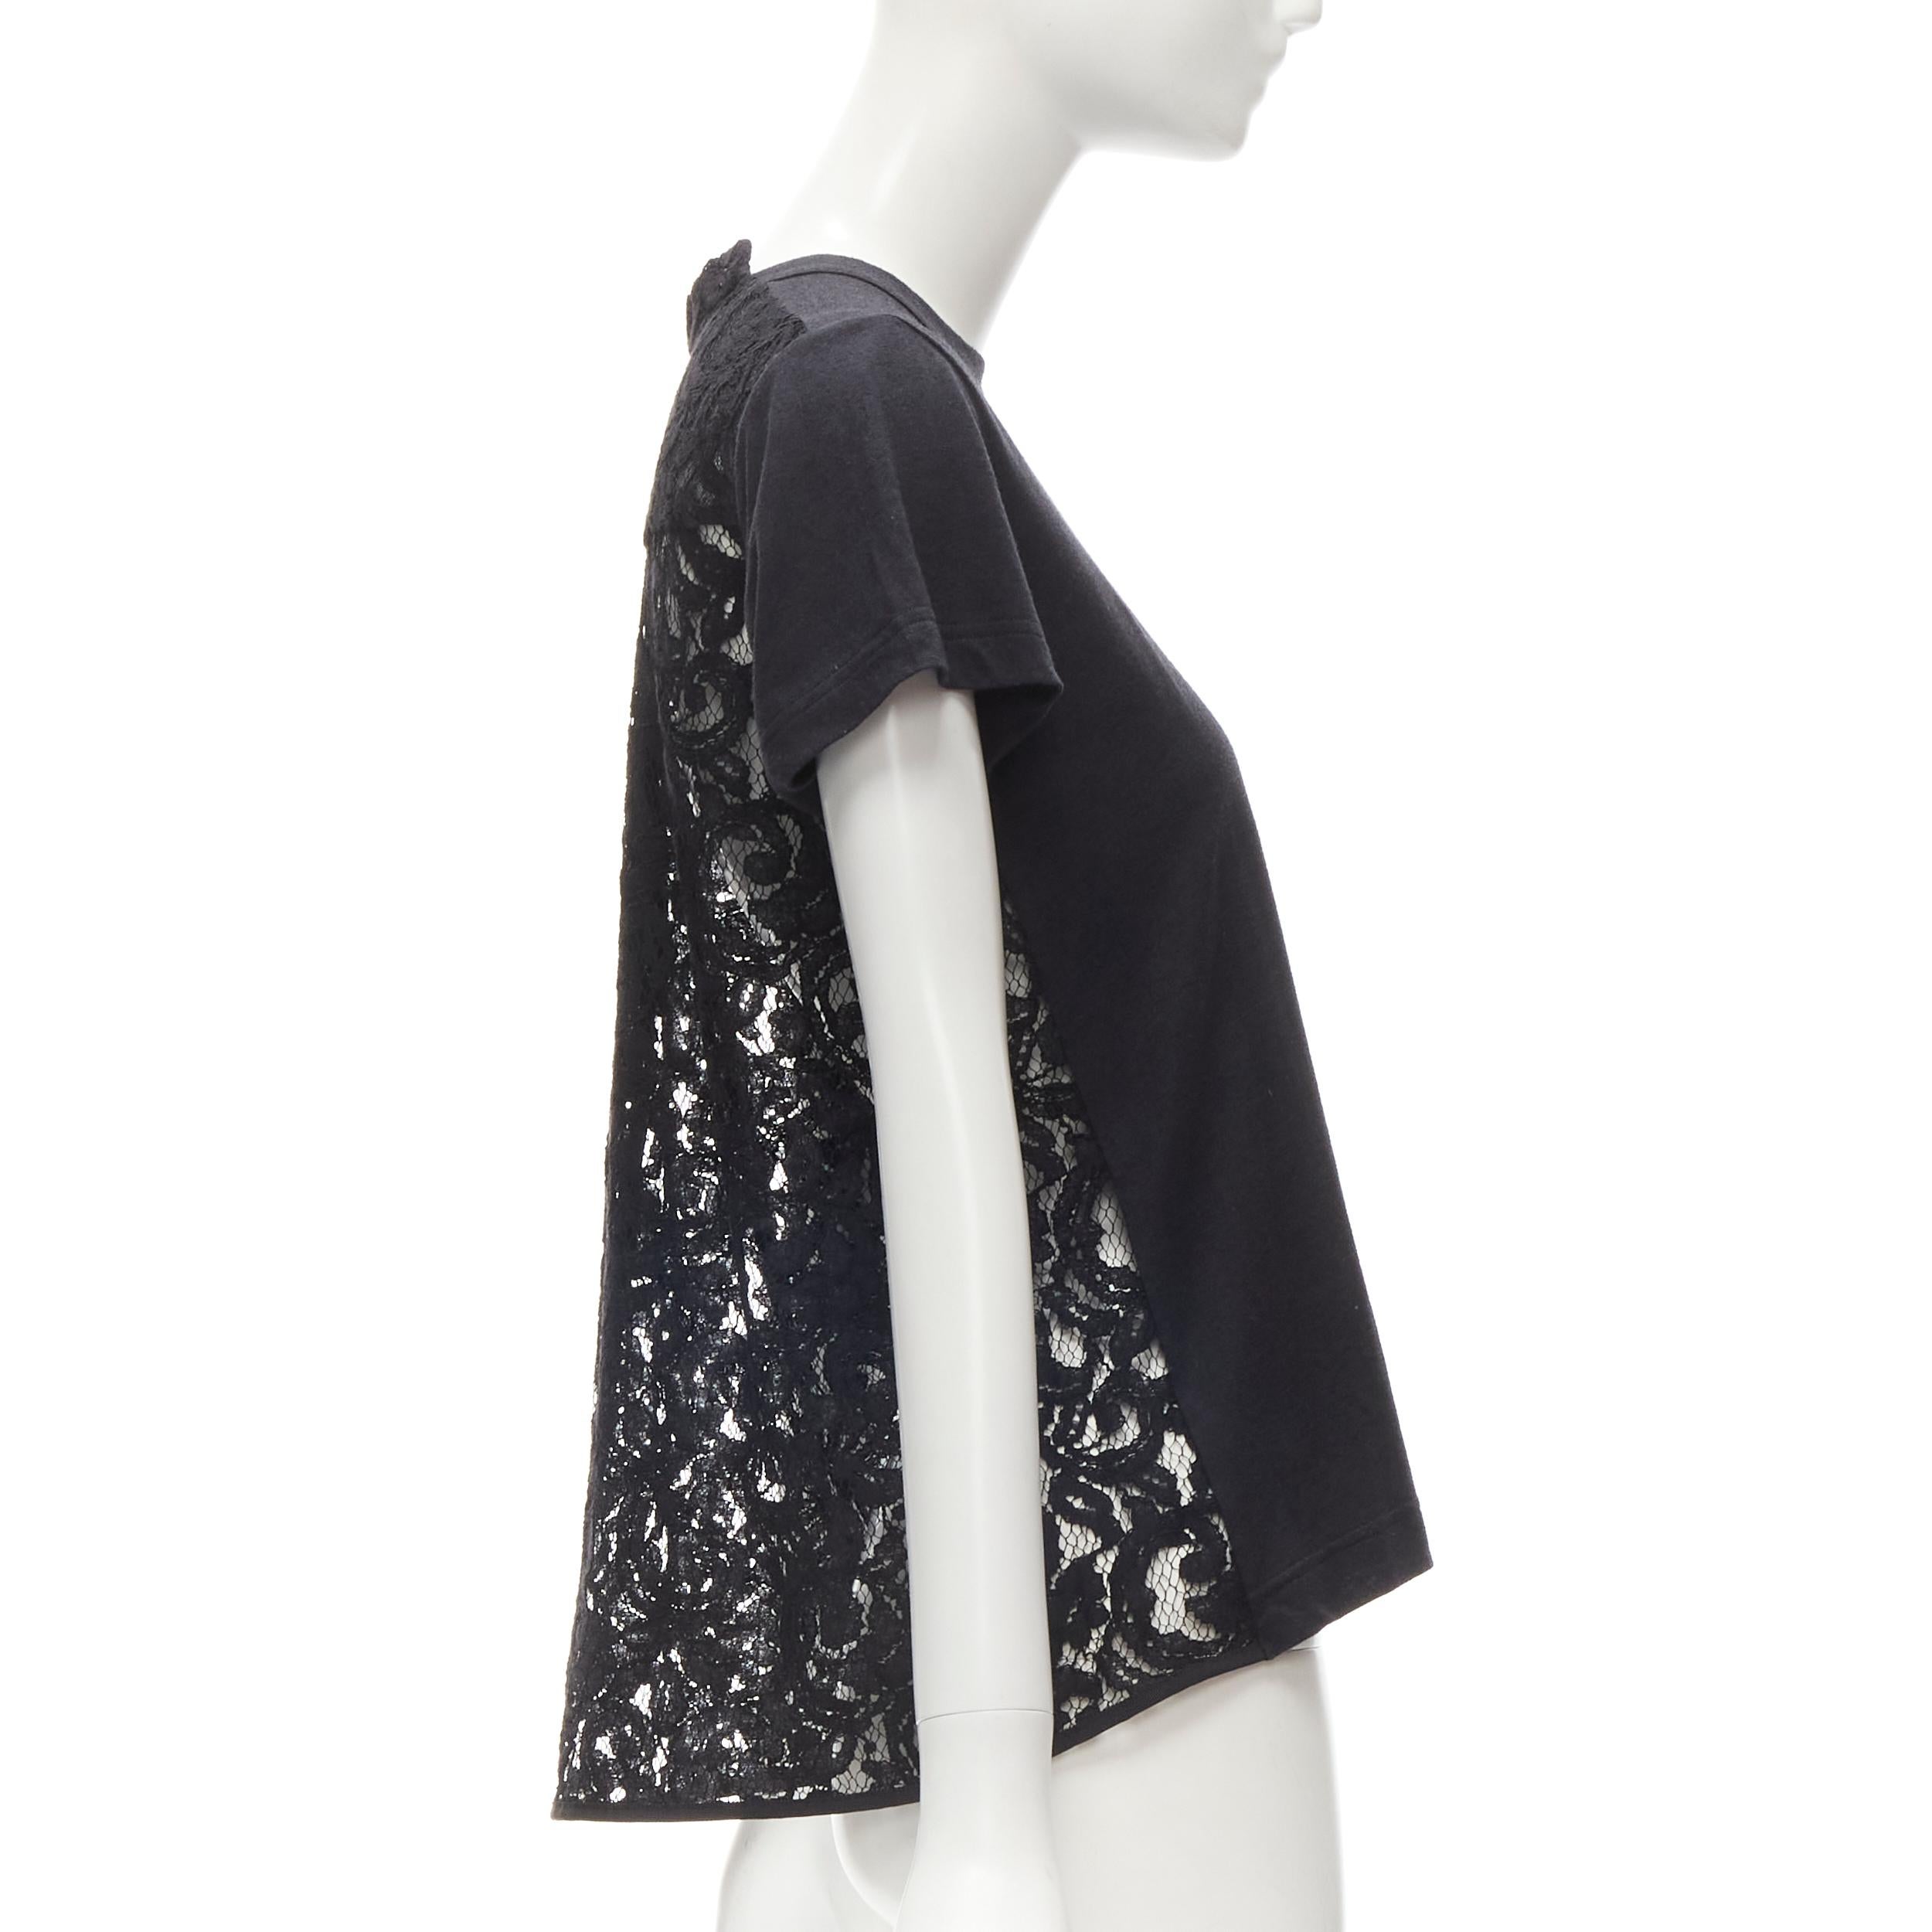 SACAI black cotton floral lace flare back tshirt JP1 S
Brand: Sacai
Designer: Chitose Abe
Material: Cotton
Color: Black
Pattern: Solid
Made in: Japan

CONDITION:
Condition: Excellent, this item was pre-owned and is in excellent condition.